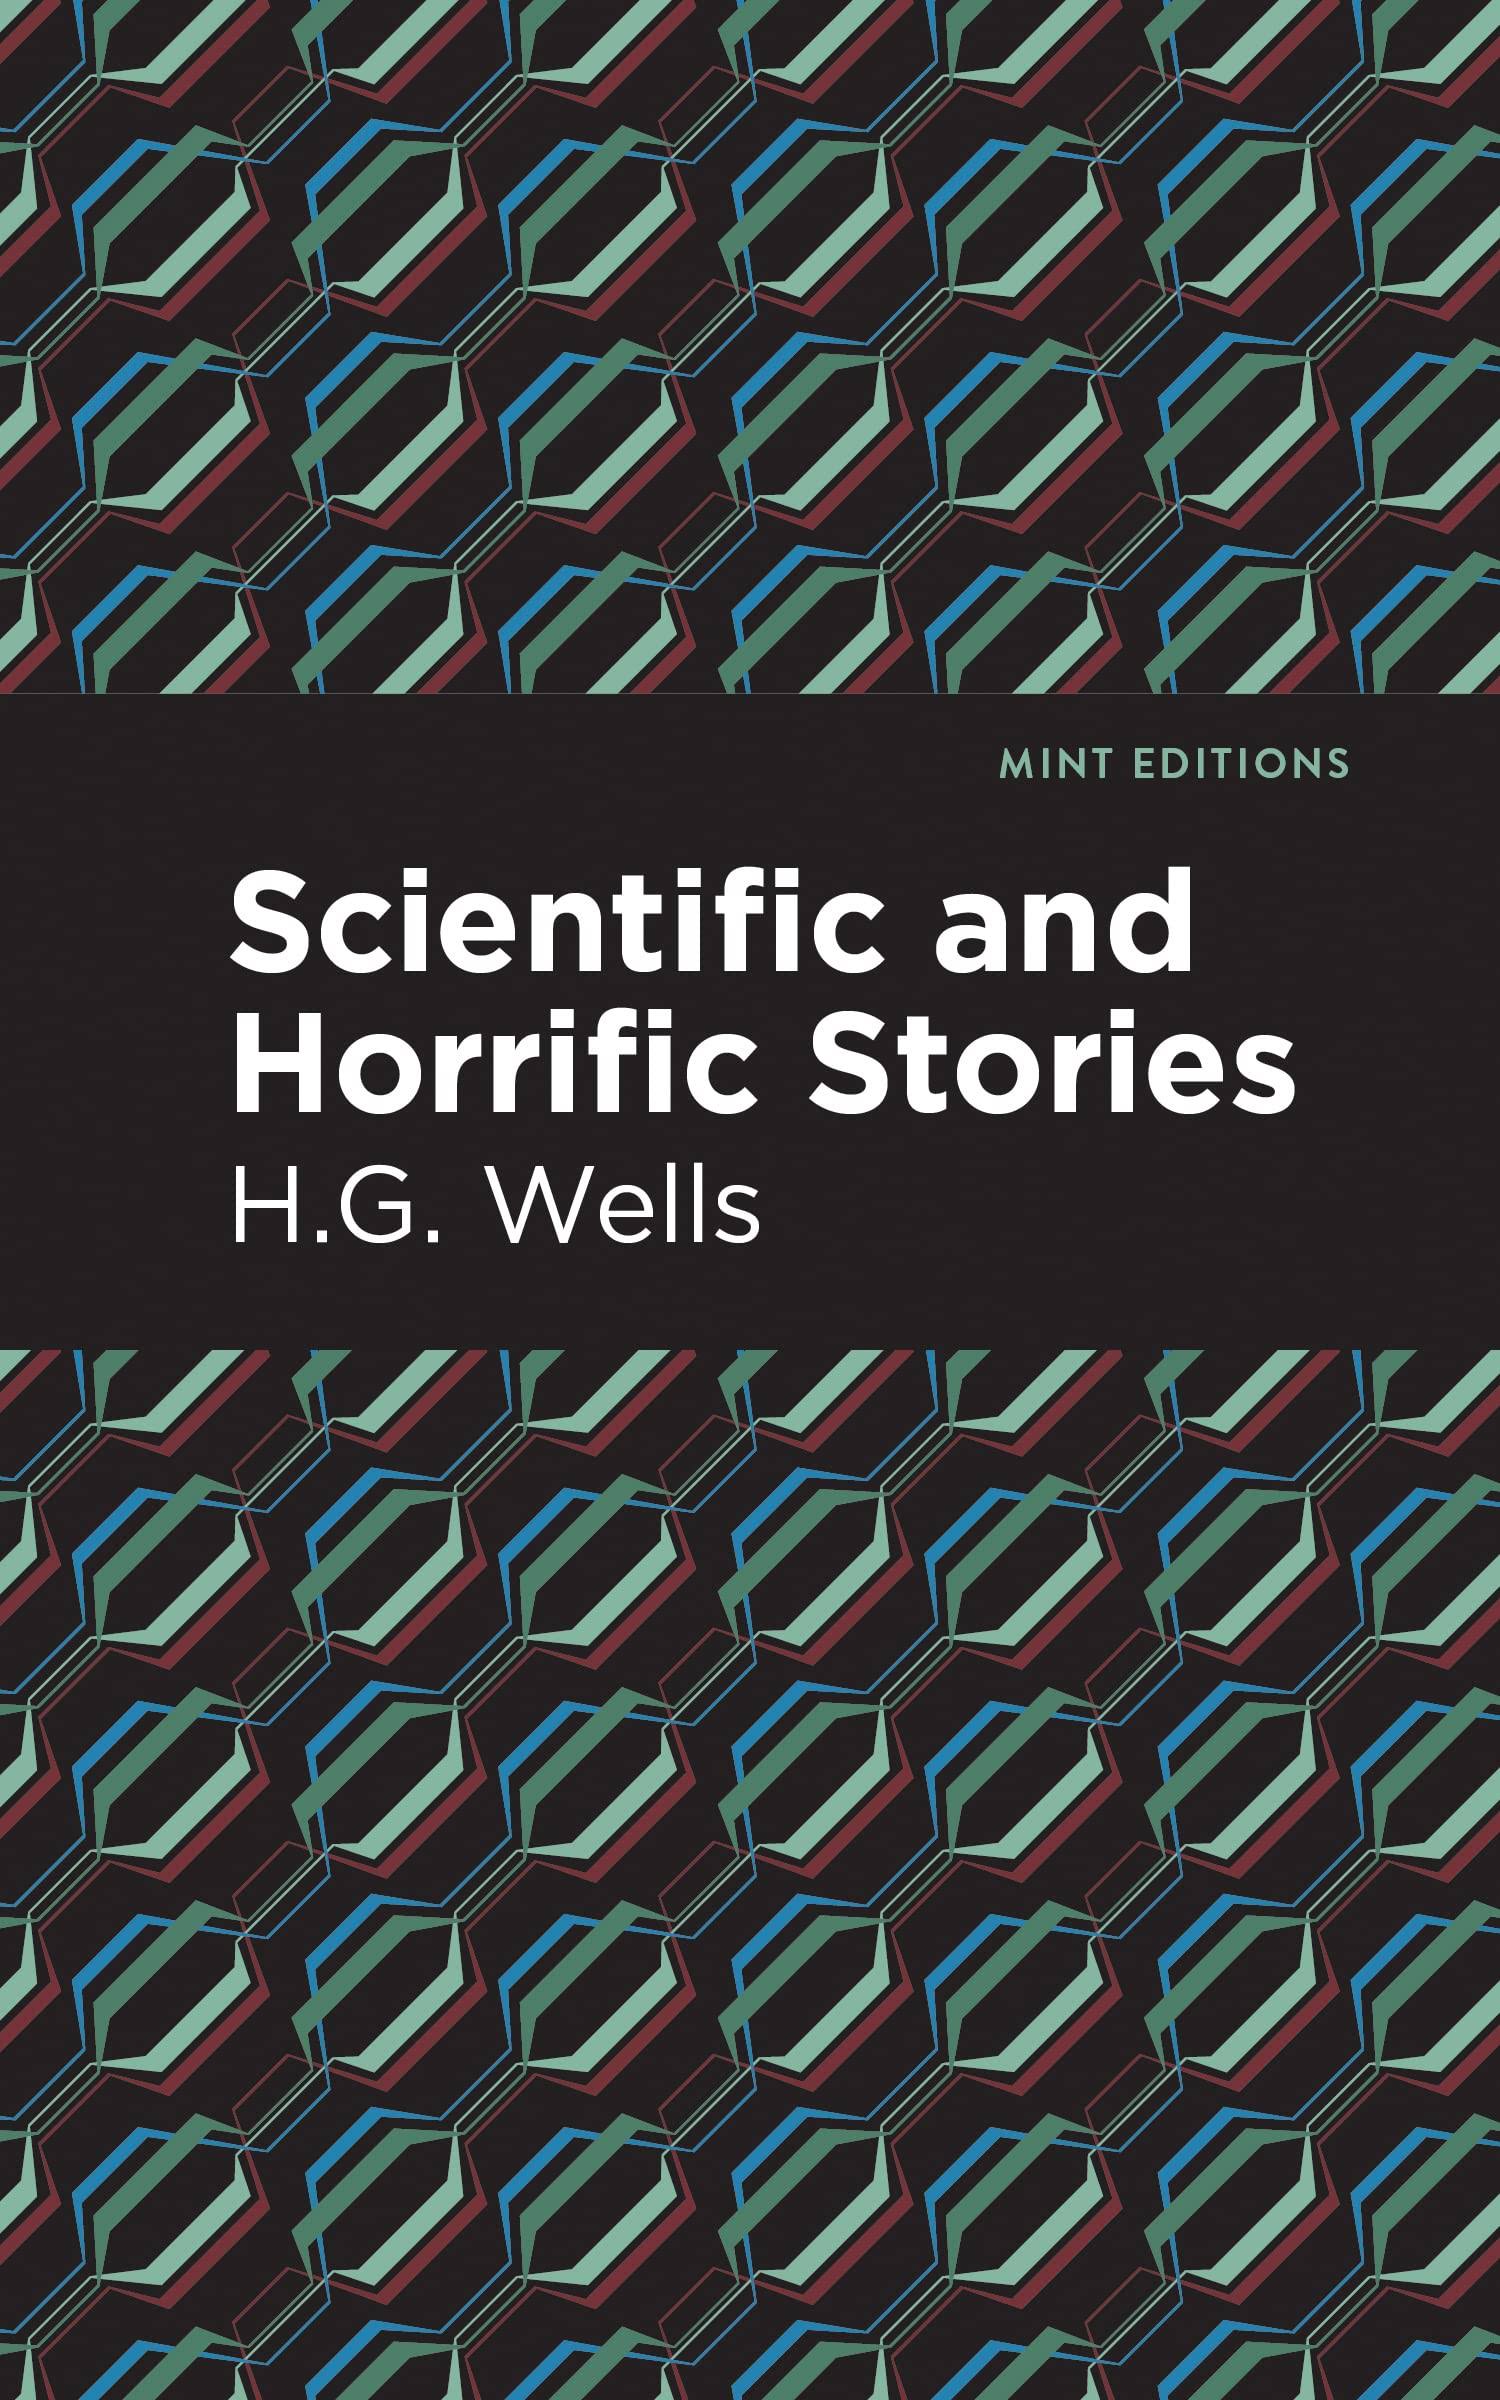 Scientific and Horrific Stories by H.G. Wells